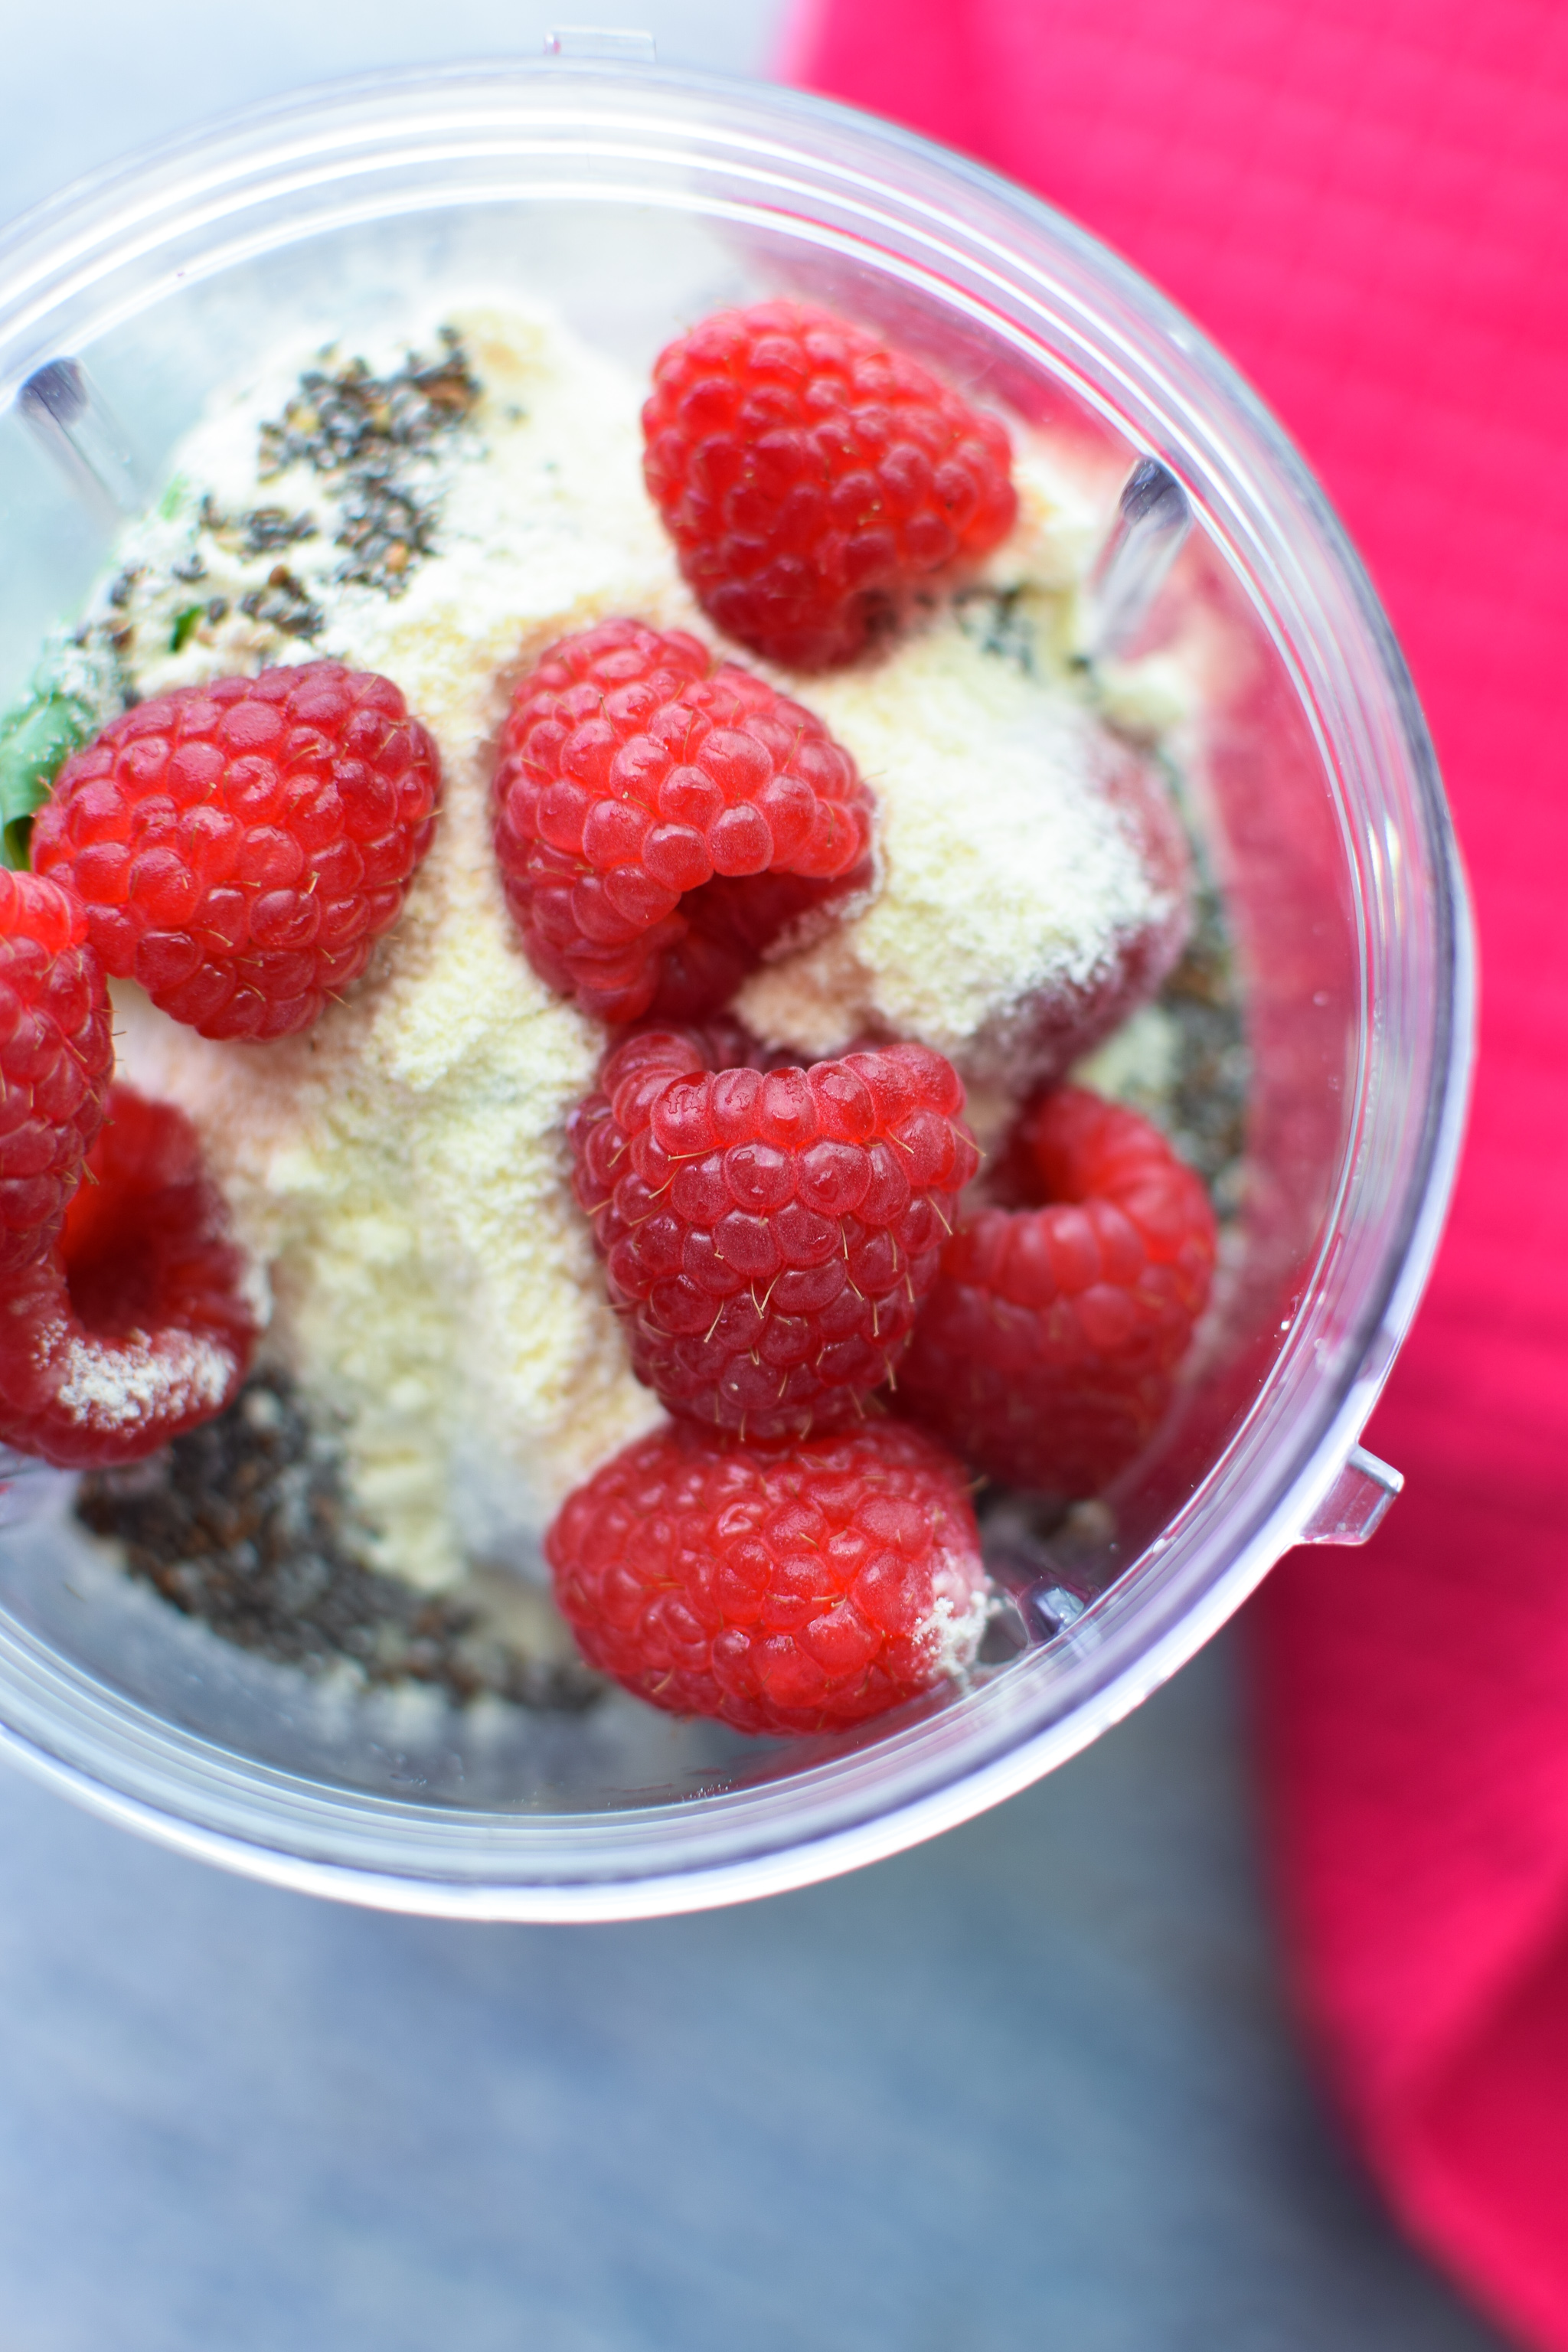 Our very favorite go-to Berry Protein Smoothies recipe in two ways! Packed with berries, greens, and protein, and super easy for meal prepping! - ProjectMealPlan.com